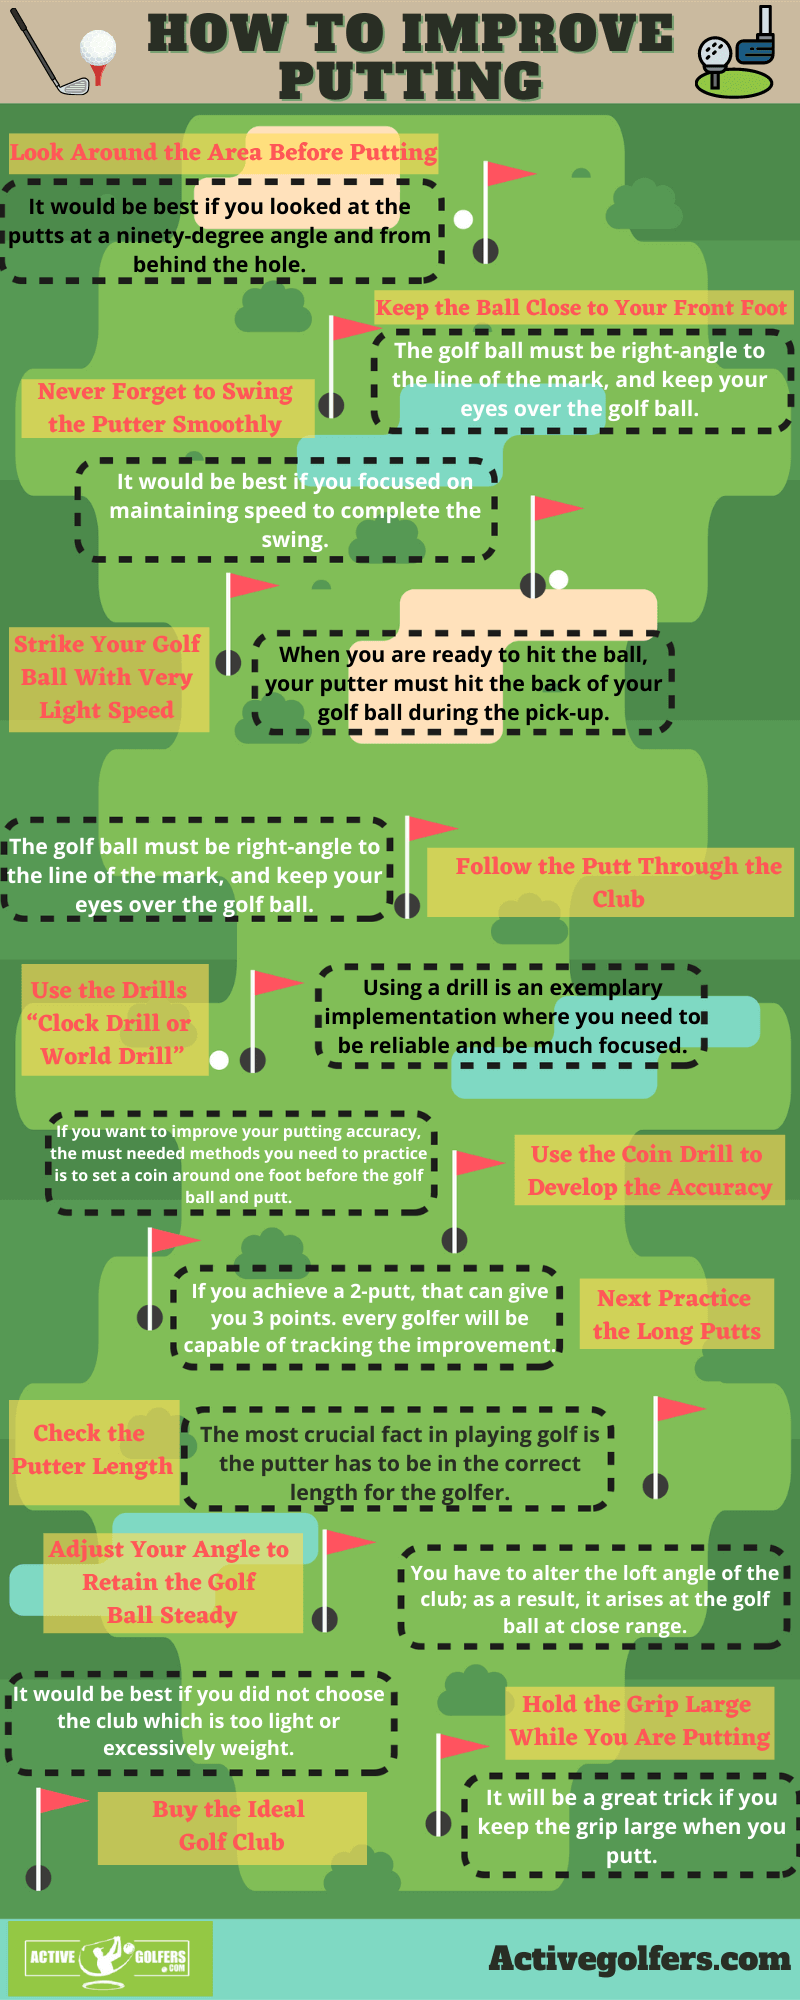 How To Improve Putting Infographic